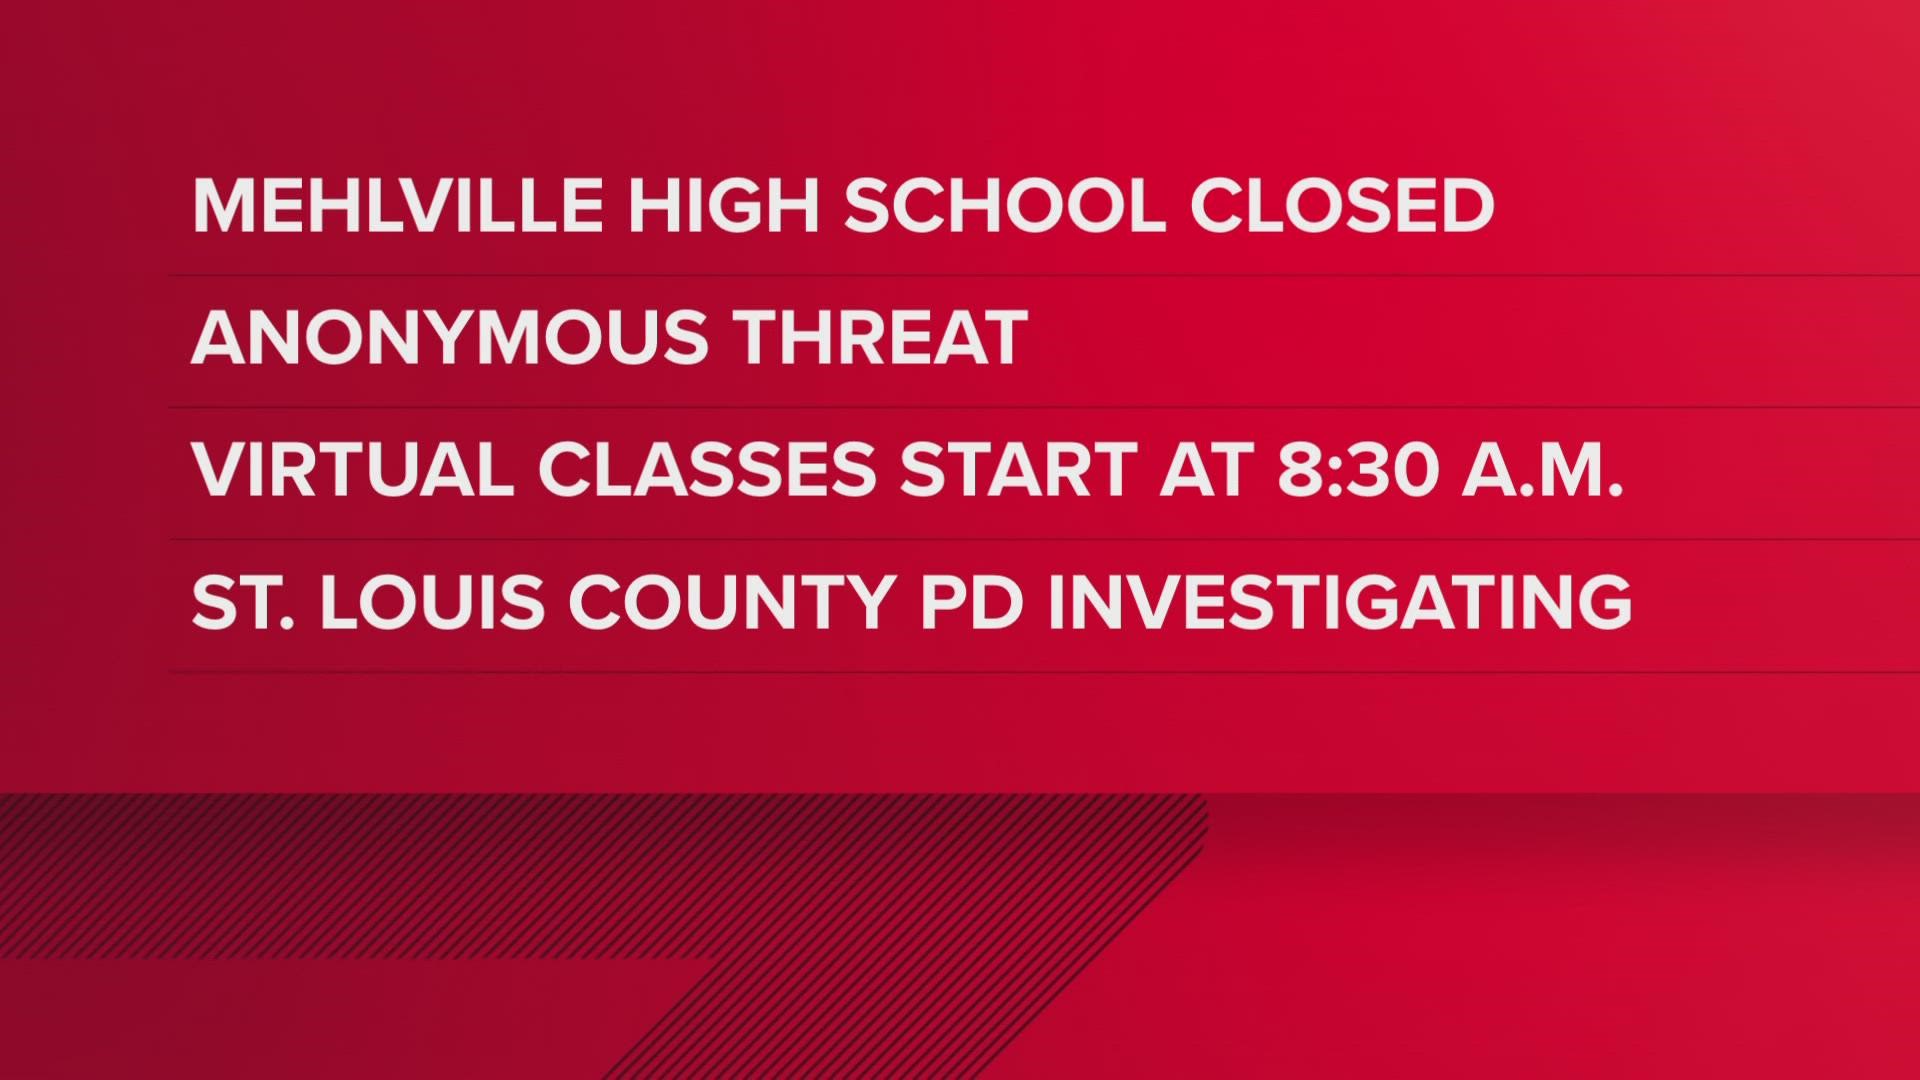 The St. Louis County Police Department is investigating the threat.